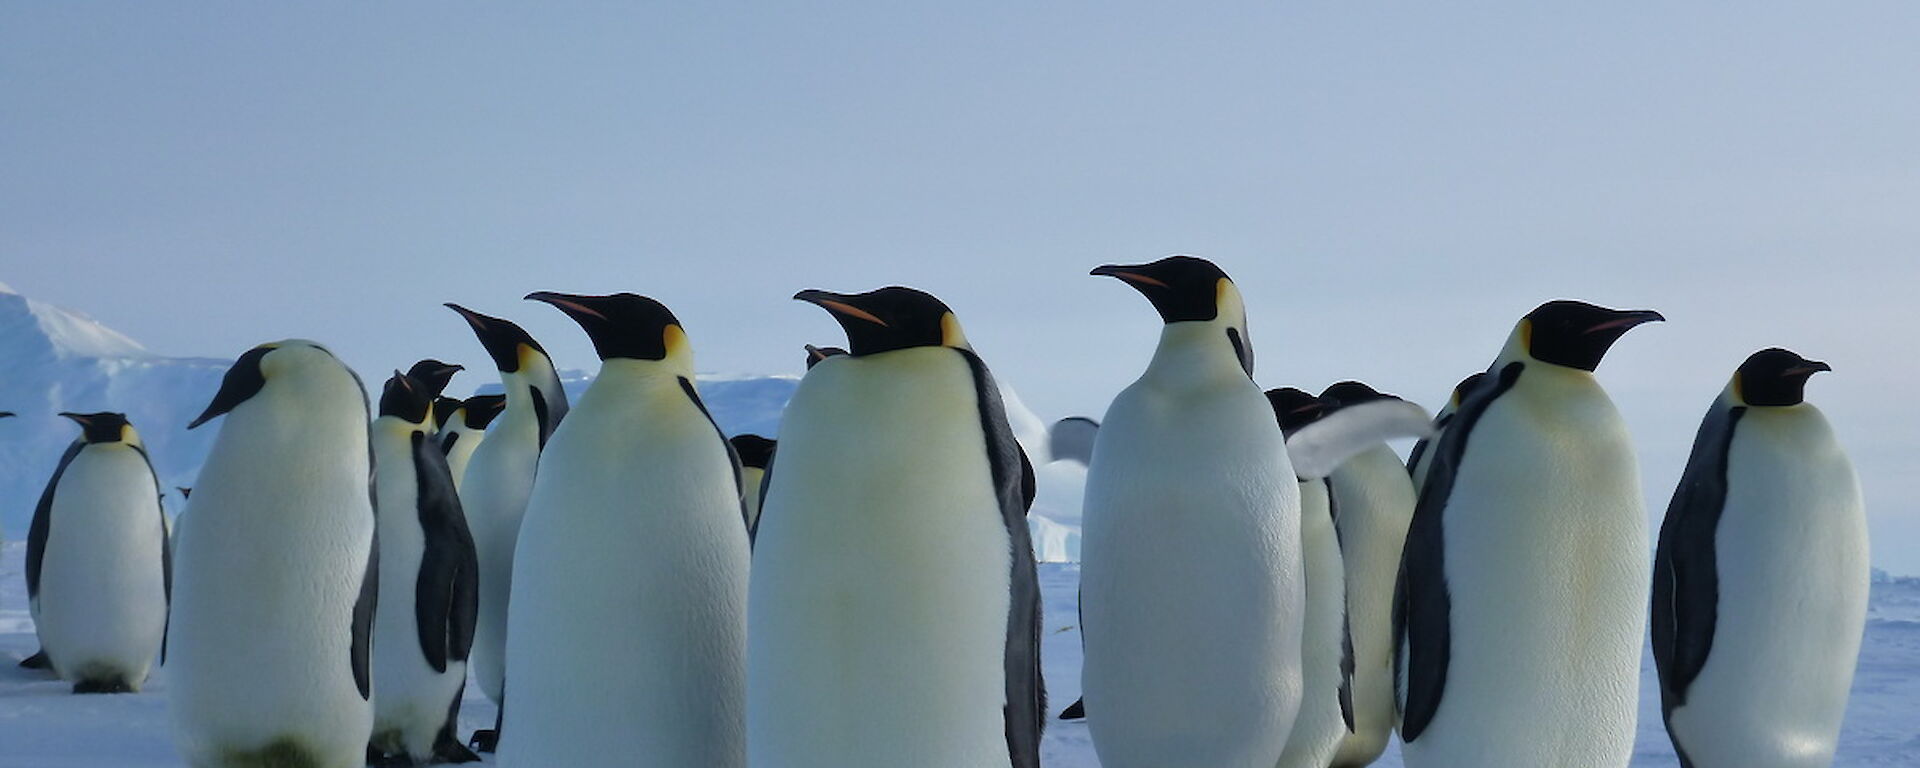 Emperor penguins in a group, ice in the background